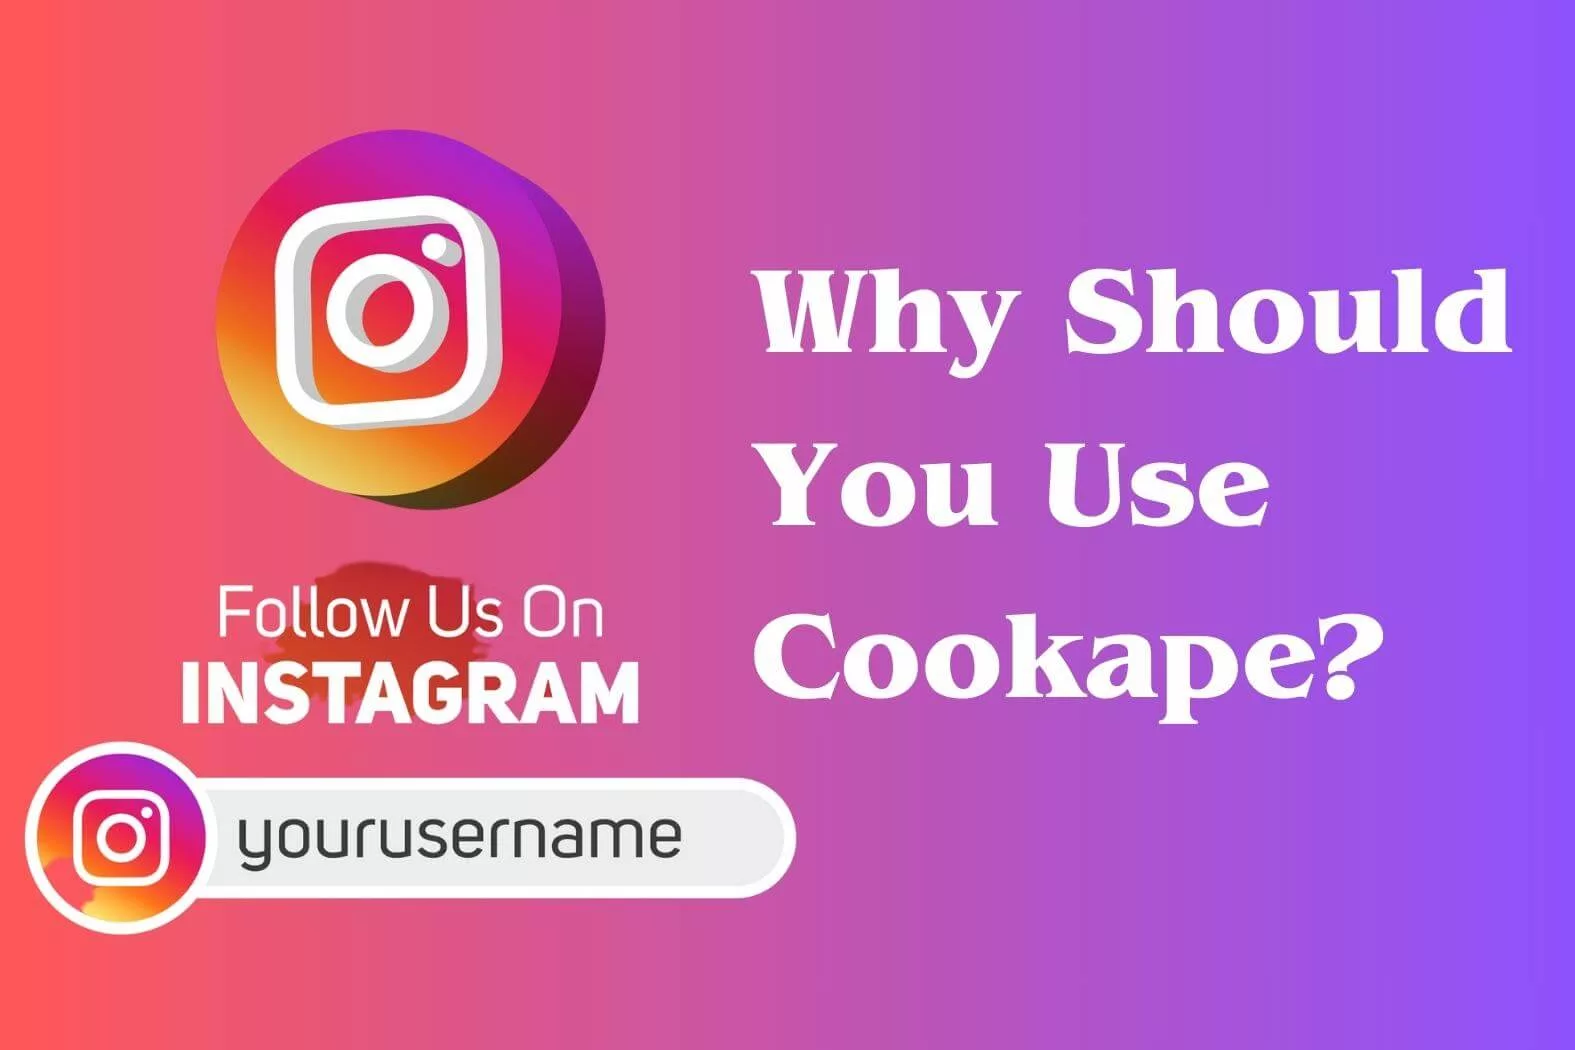 Why Should You Use Cookape?